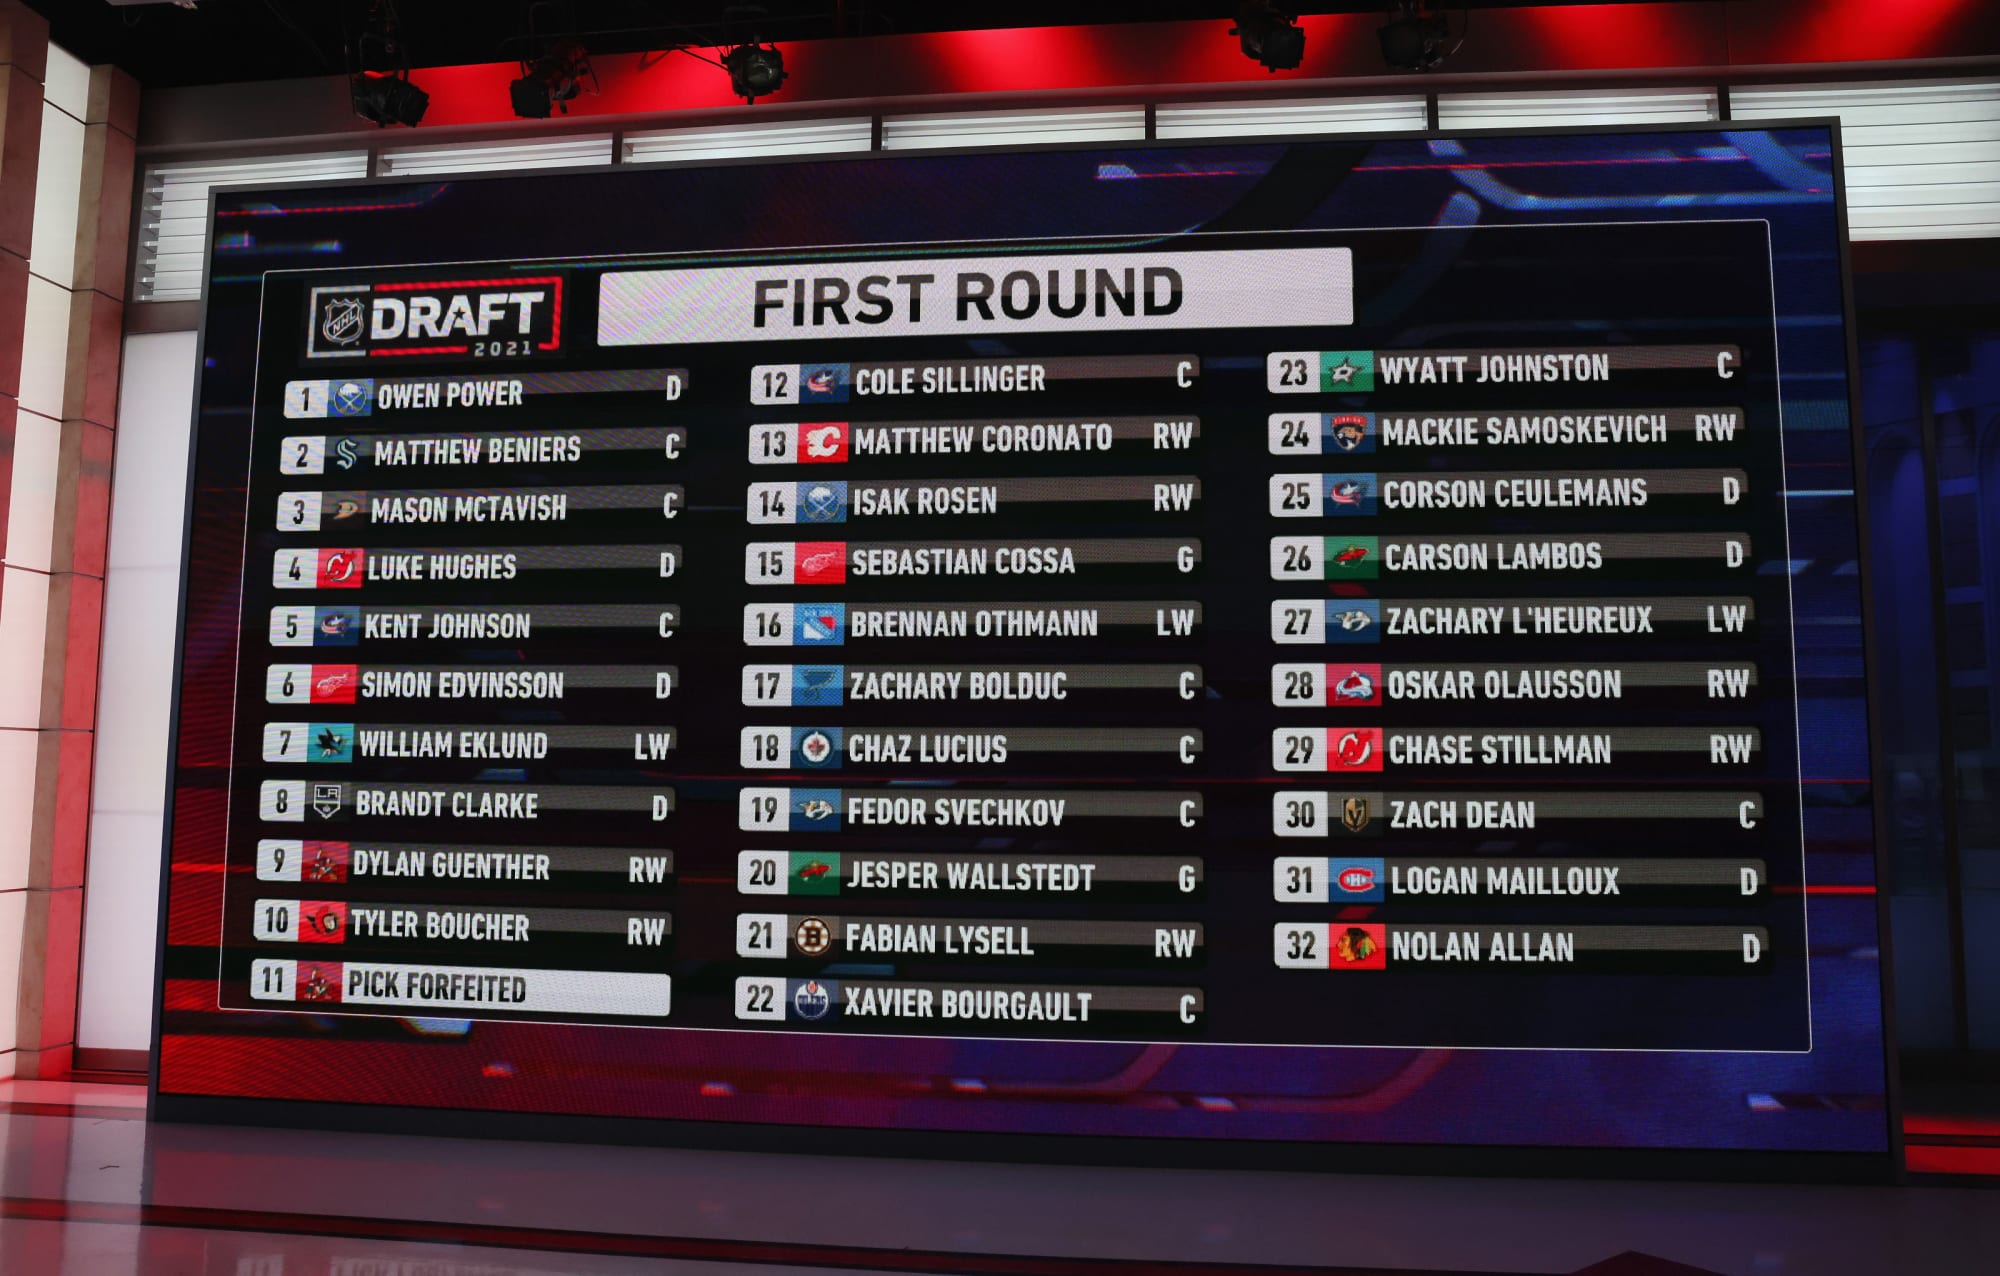 Complete Draft Order For The First Round